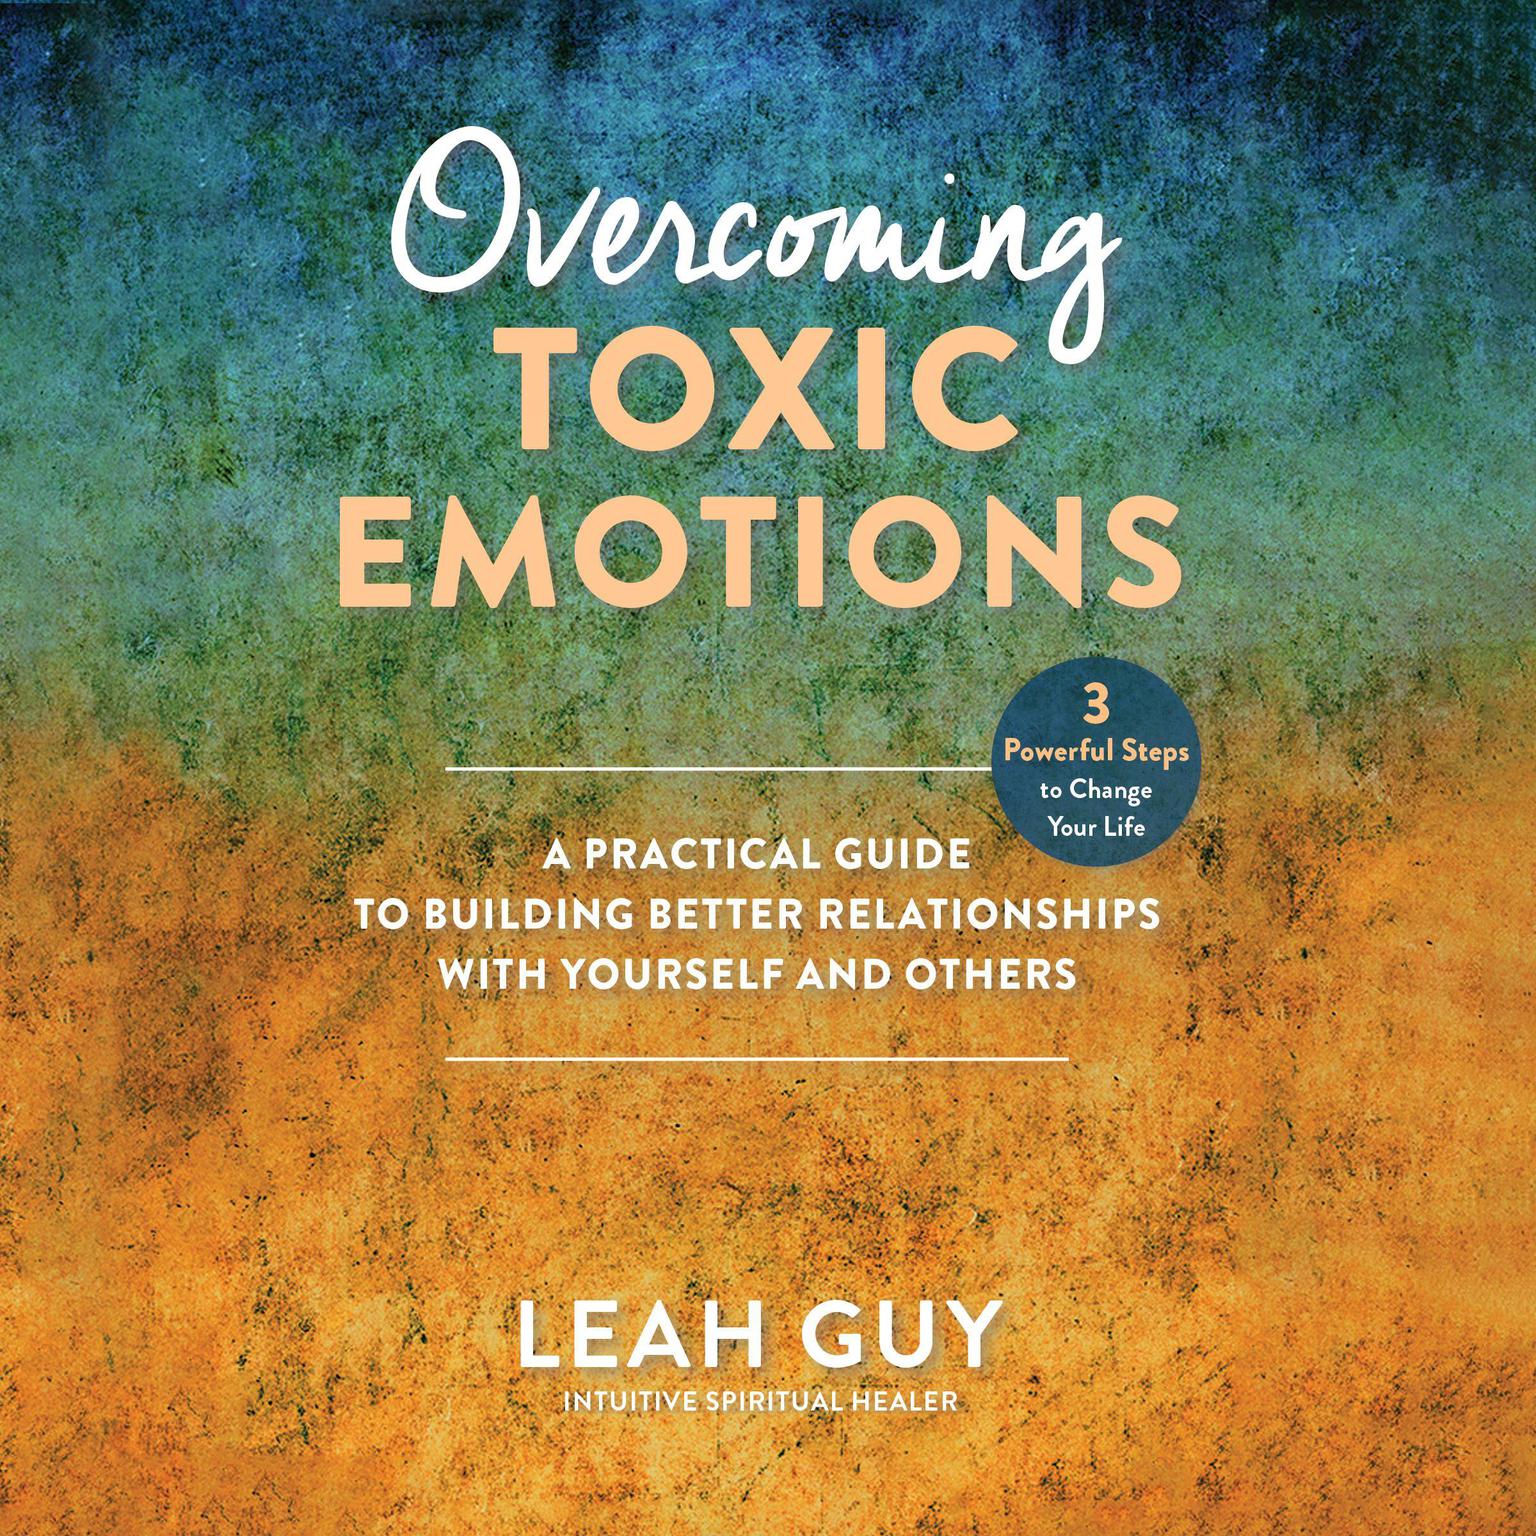 Overcoming Toxic Emotions: A Practical Guide to Building Better Relationships with Yourself and Others Audiobook, by Leah Guy